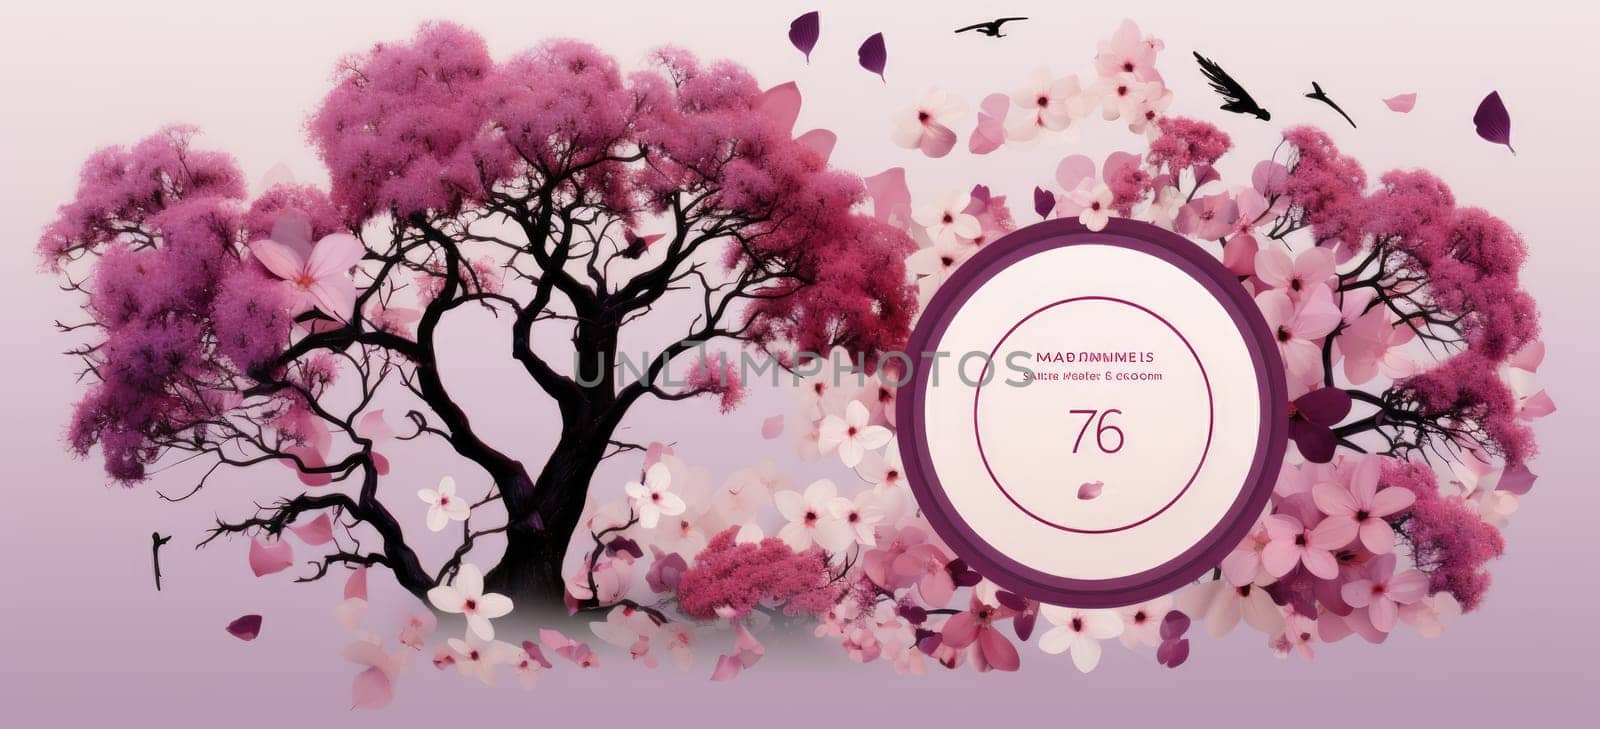 Greeting card template with family tree collage in delicate purple and pink tones